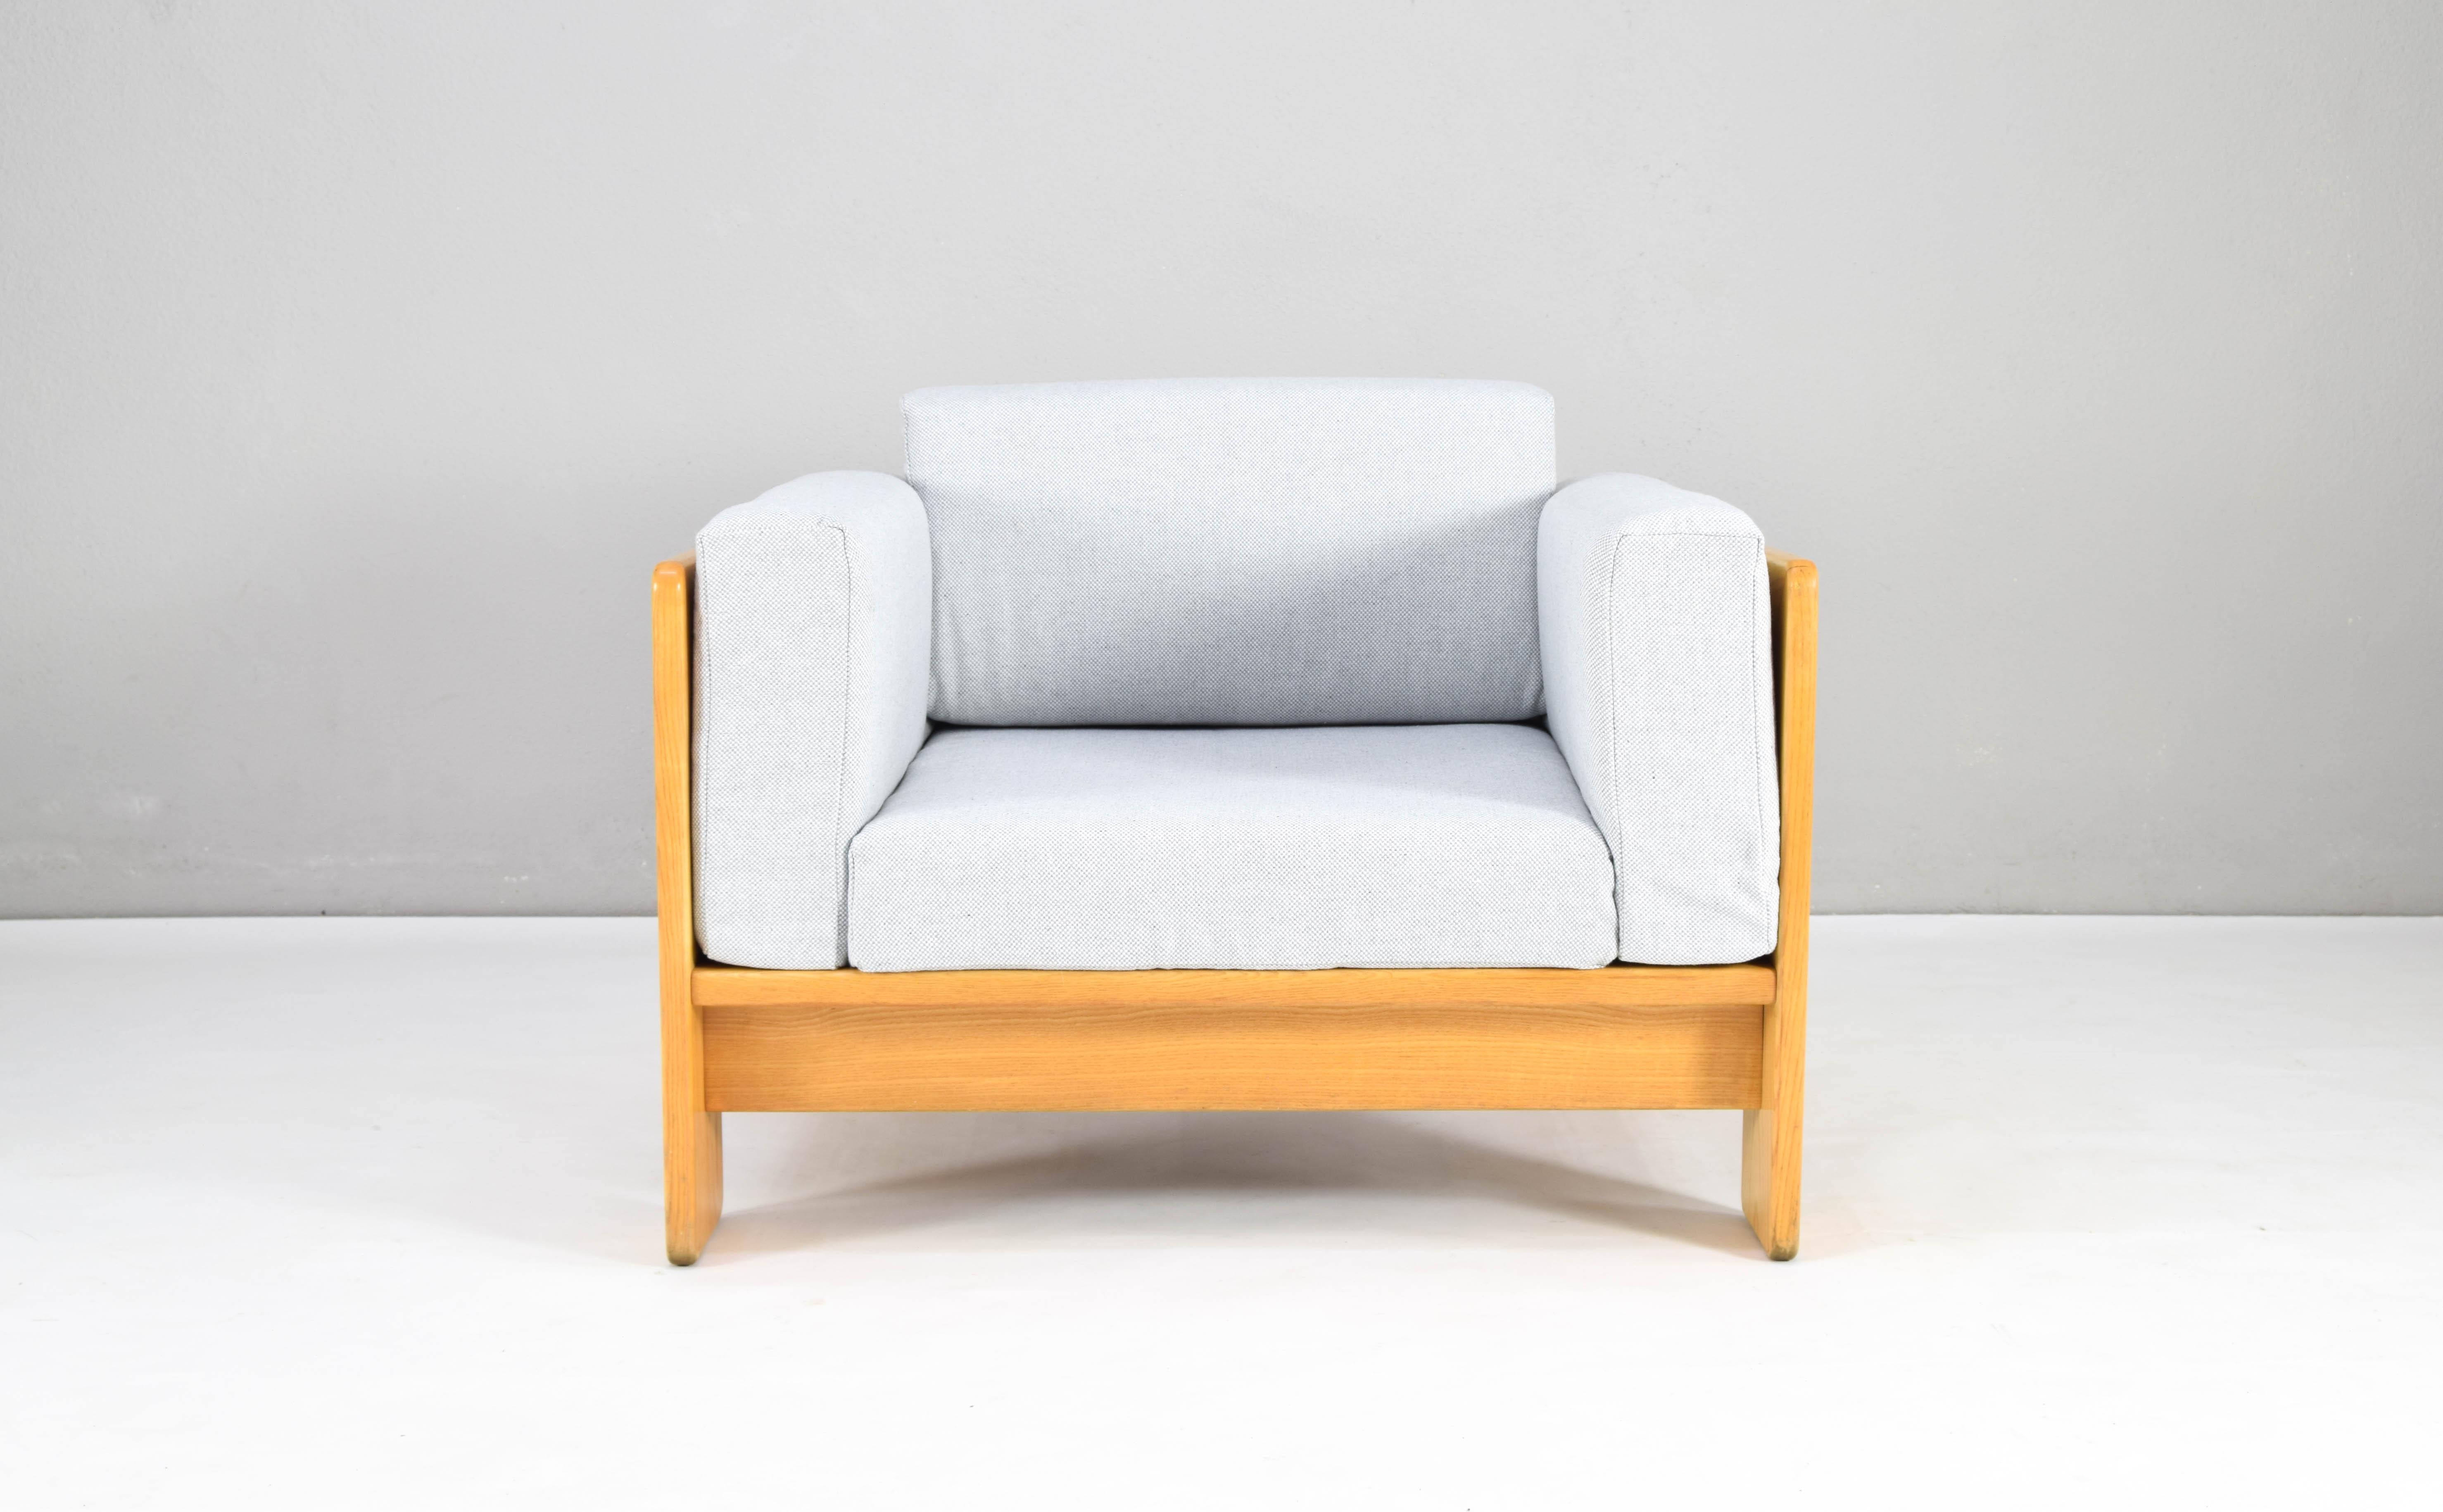 Beautiful and popular piece made by MYC Gavina Spain and designed by Afra & Tobia Scarpa in the 60s.
This armchair is a classic of Italian design, with its clean lines it combines robustness and elegance in equal parts.
This piece is made up of a